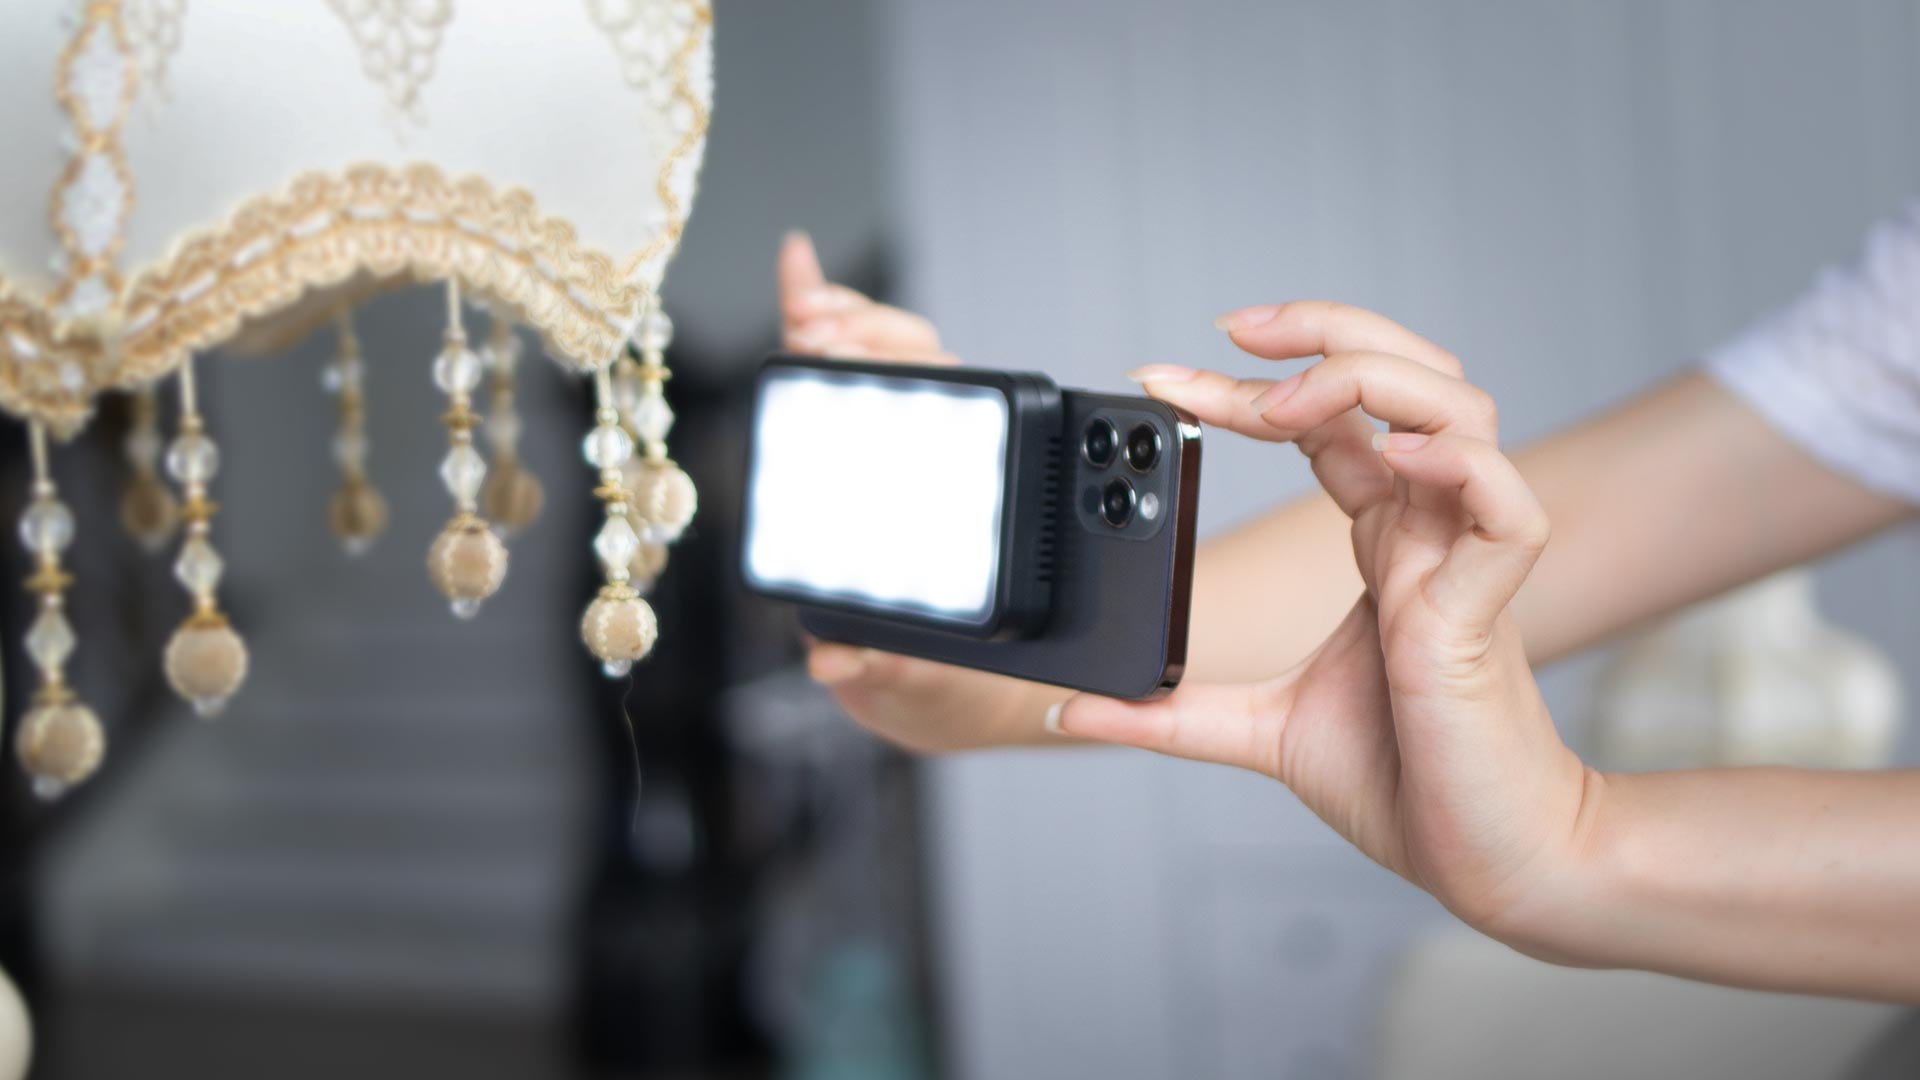 Portable video light helps get quality phone video.